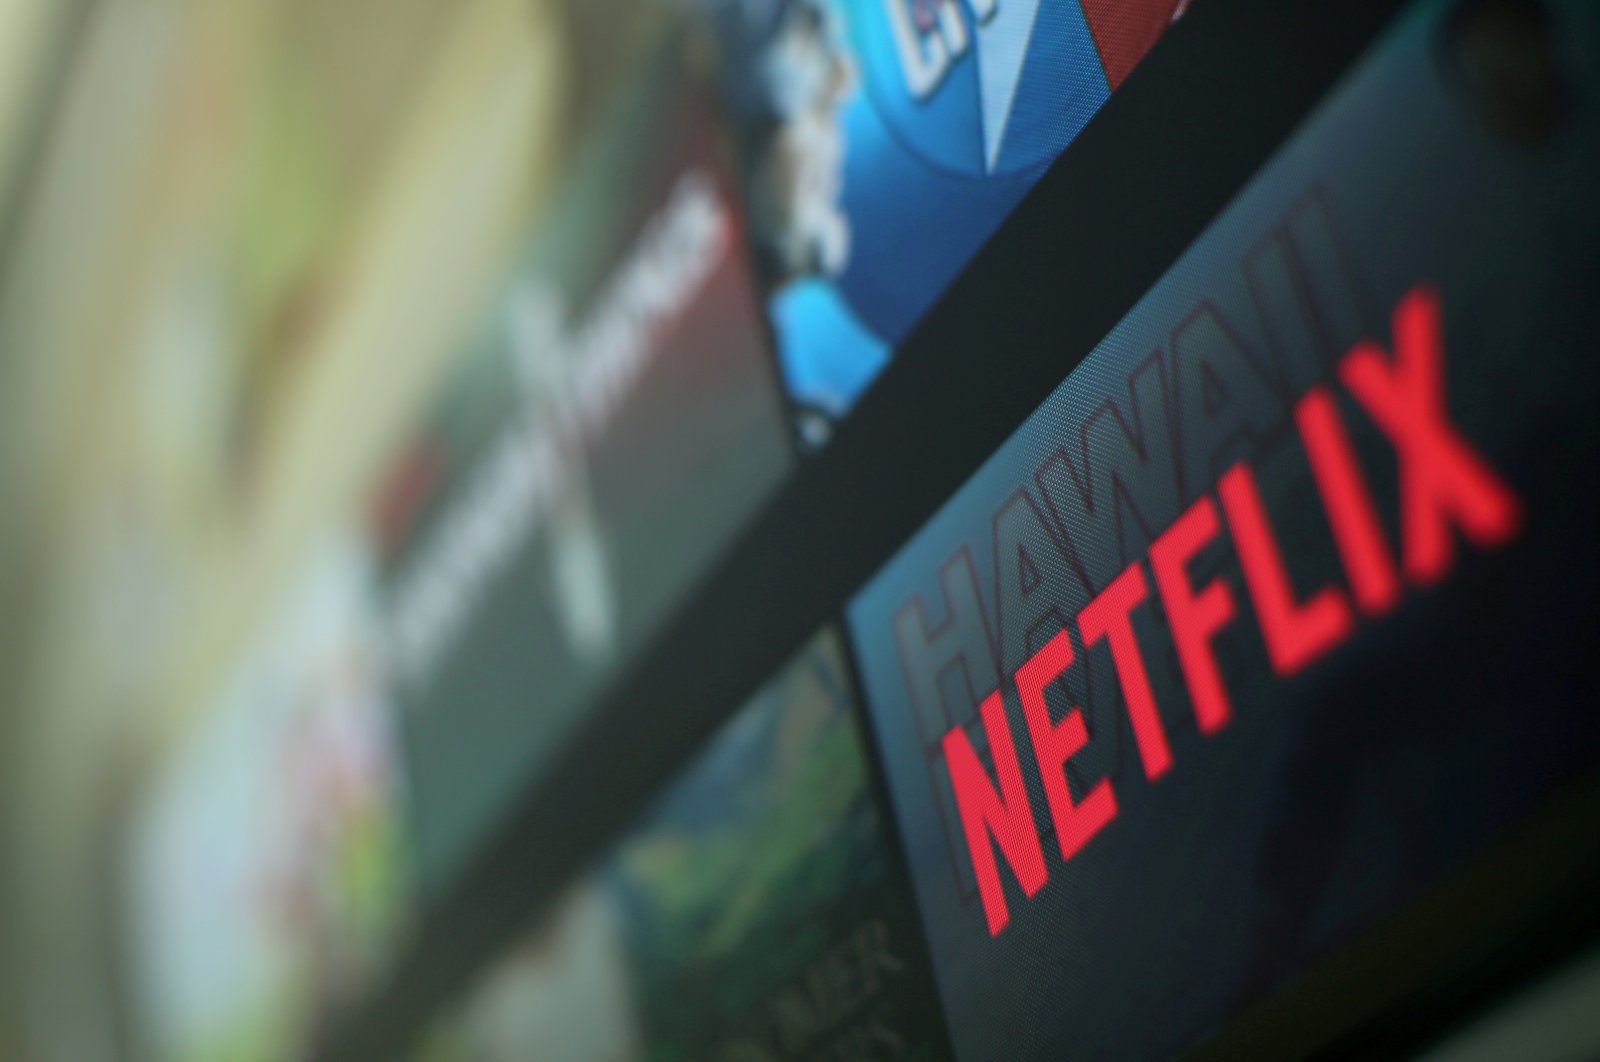 The Netflix logo is pictured on a television in this illustration photograph taken in Encinitas, California, U.S., Jan. 18, 2017. (Reuters Photo) 